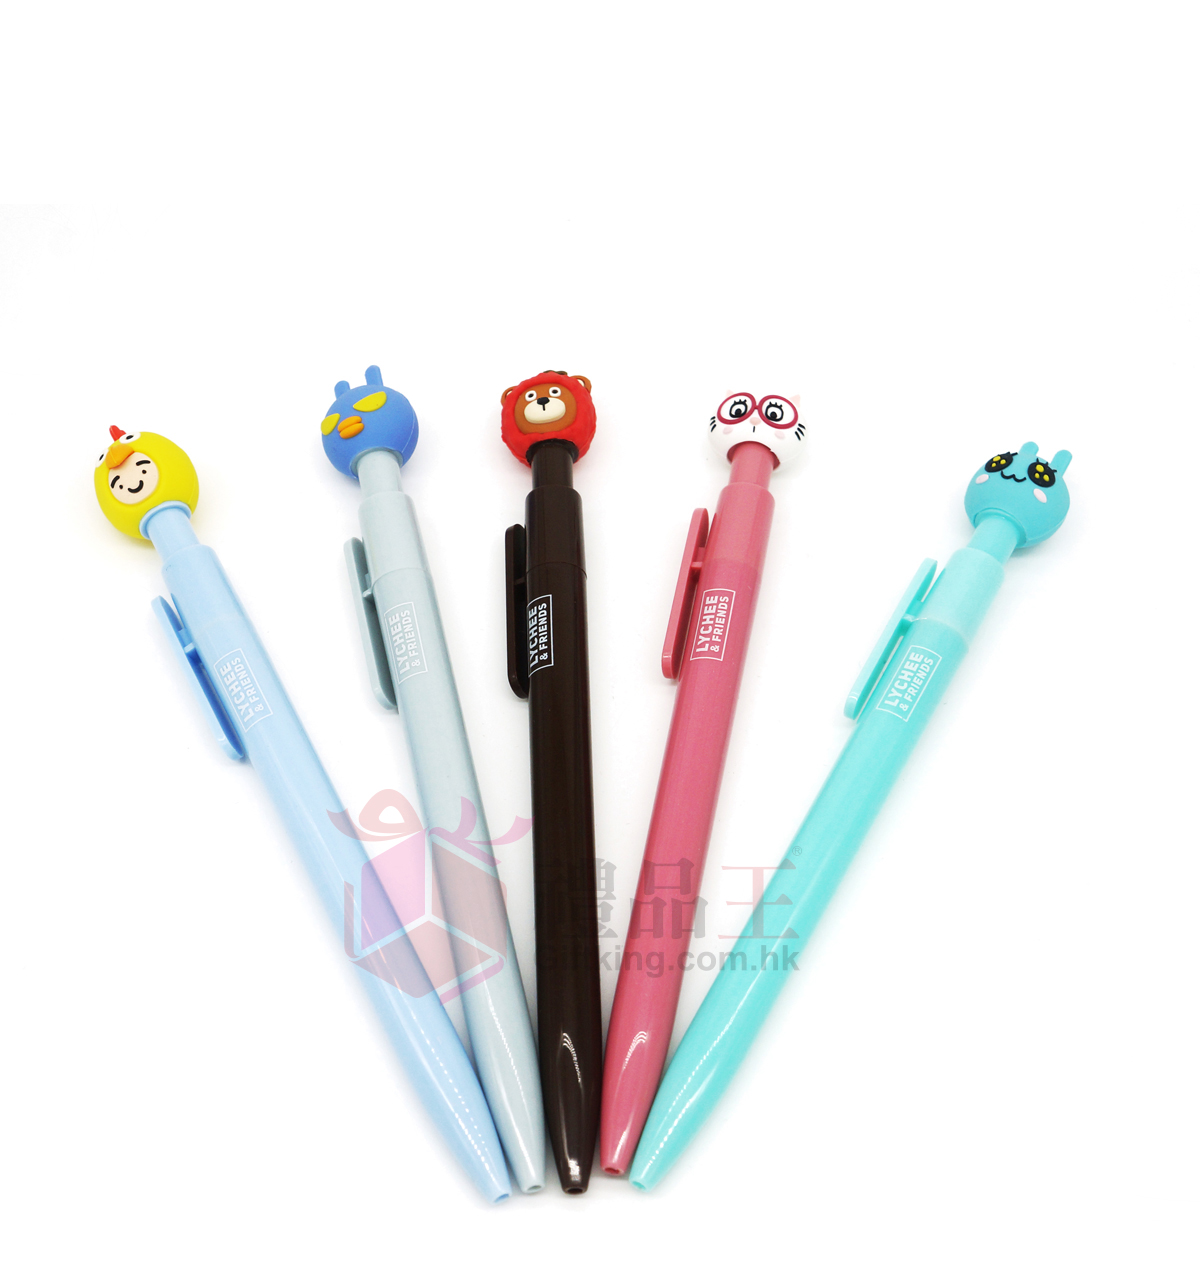 Lychee & friends characters pen (Stationery)